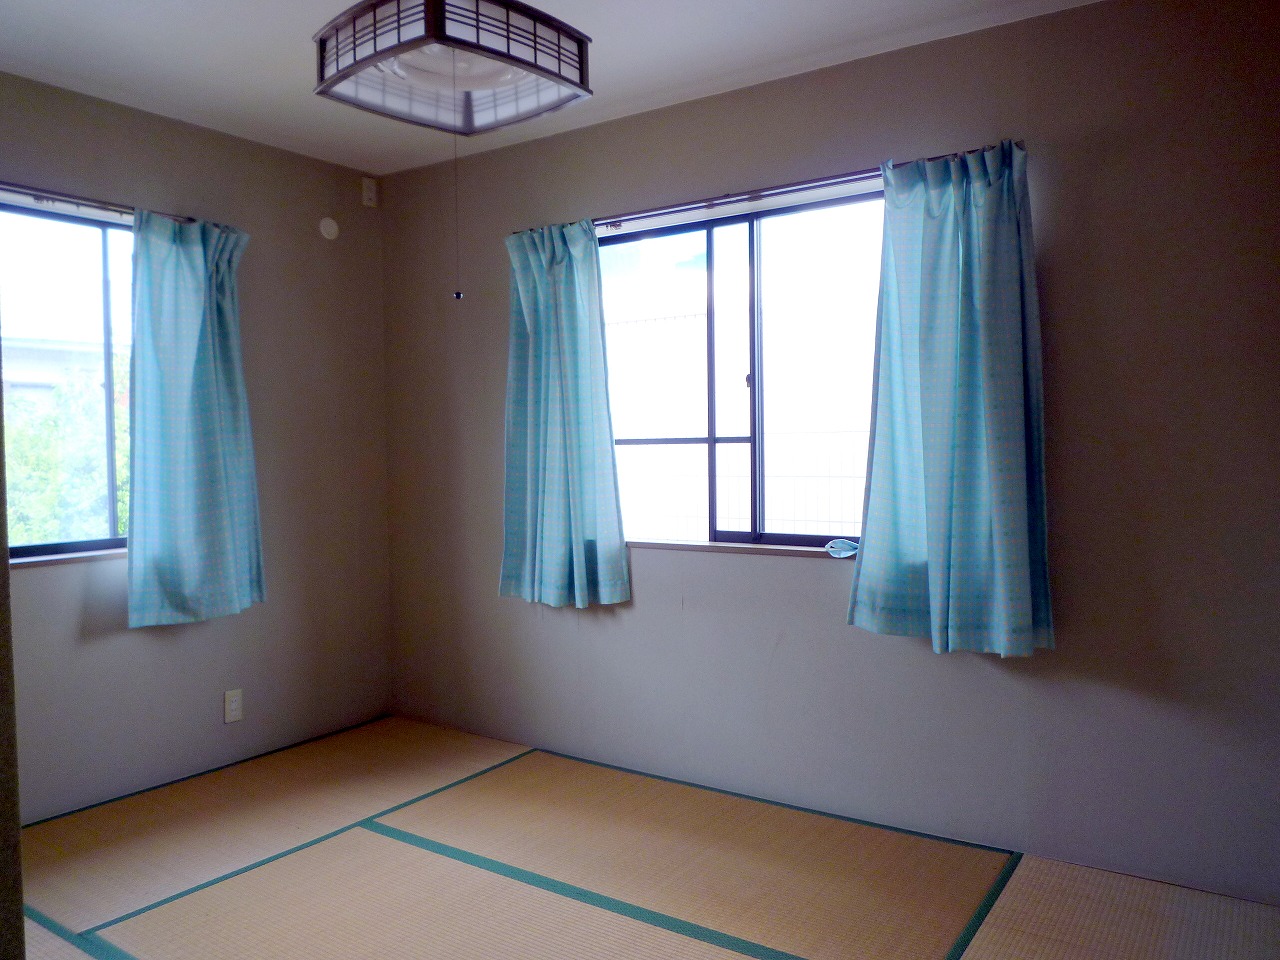 Other room space. With curtain